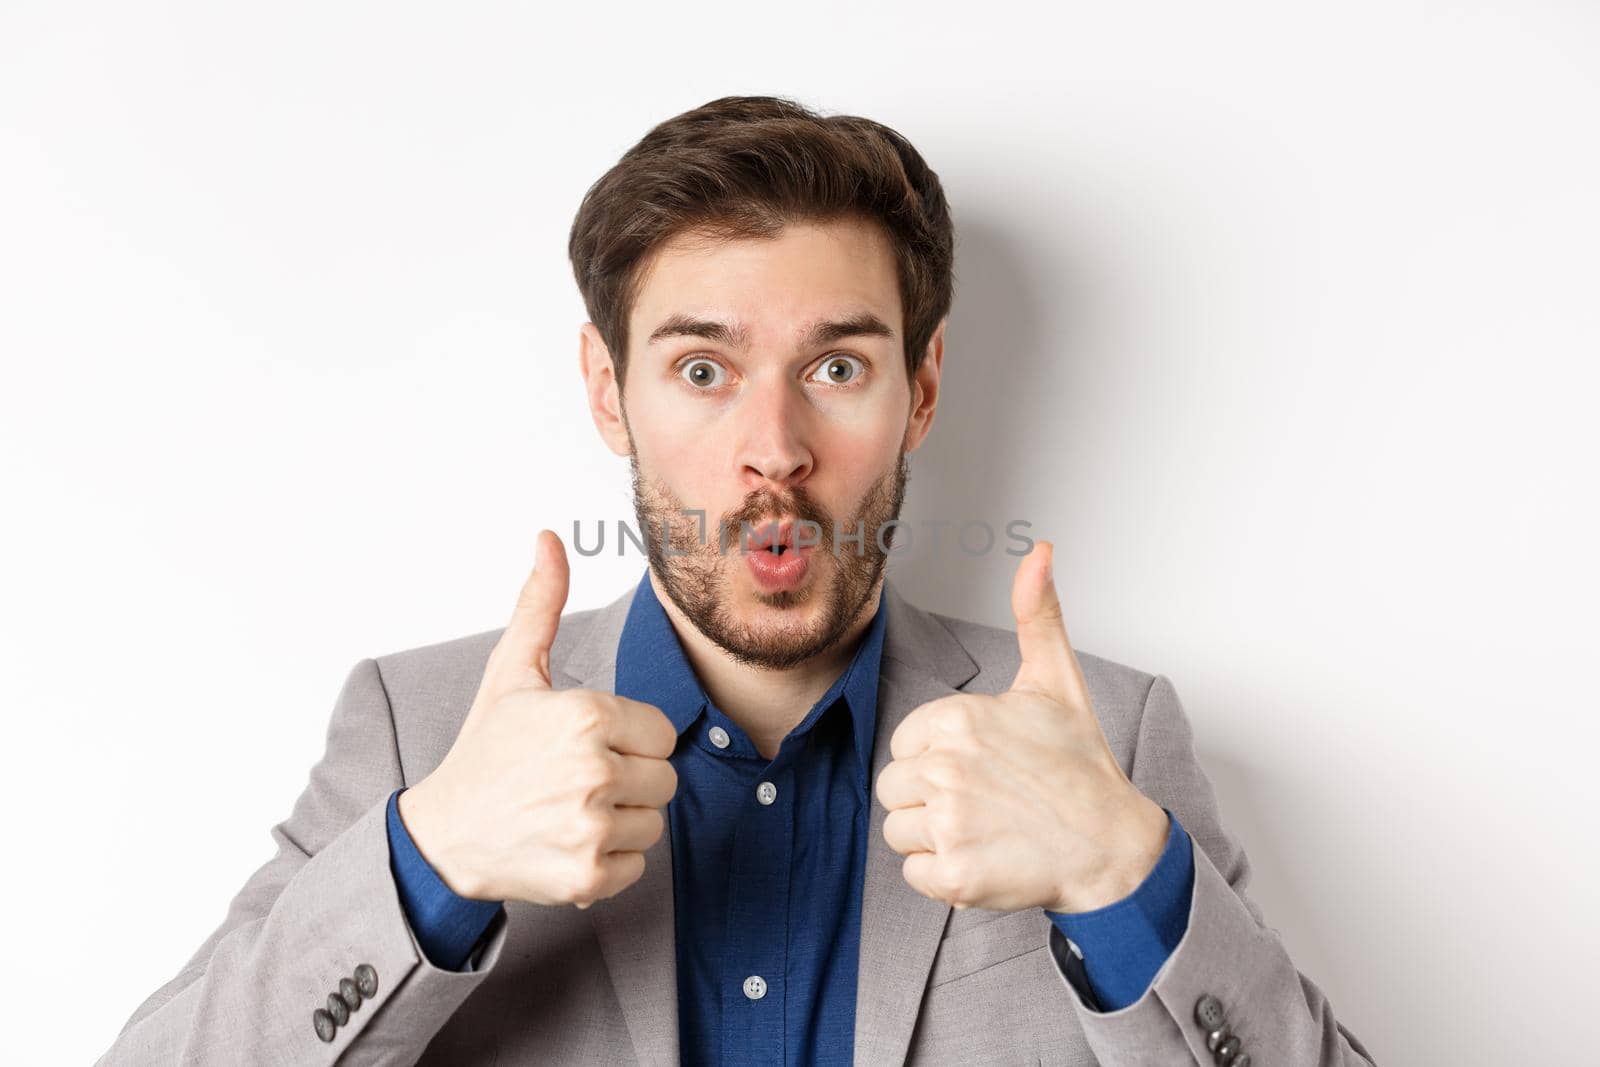 Close up portrait of excited guy in suit say wow, showing thumbs up with amazed face, checking out awesome promo, white background.